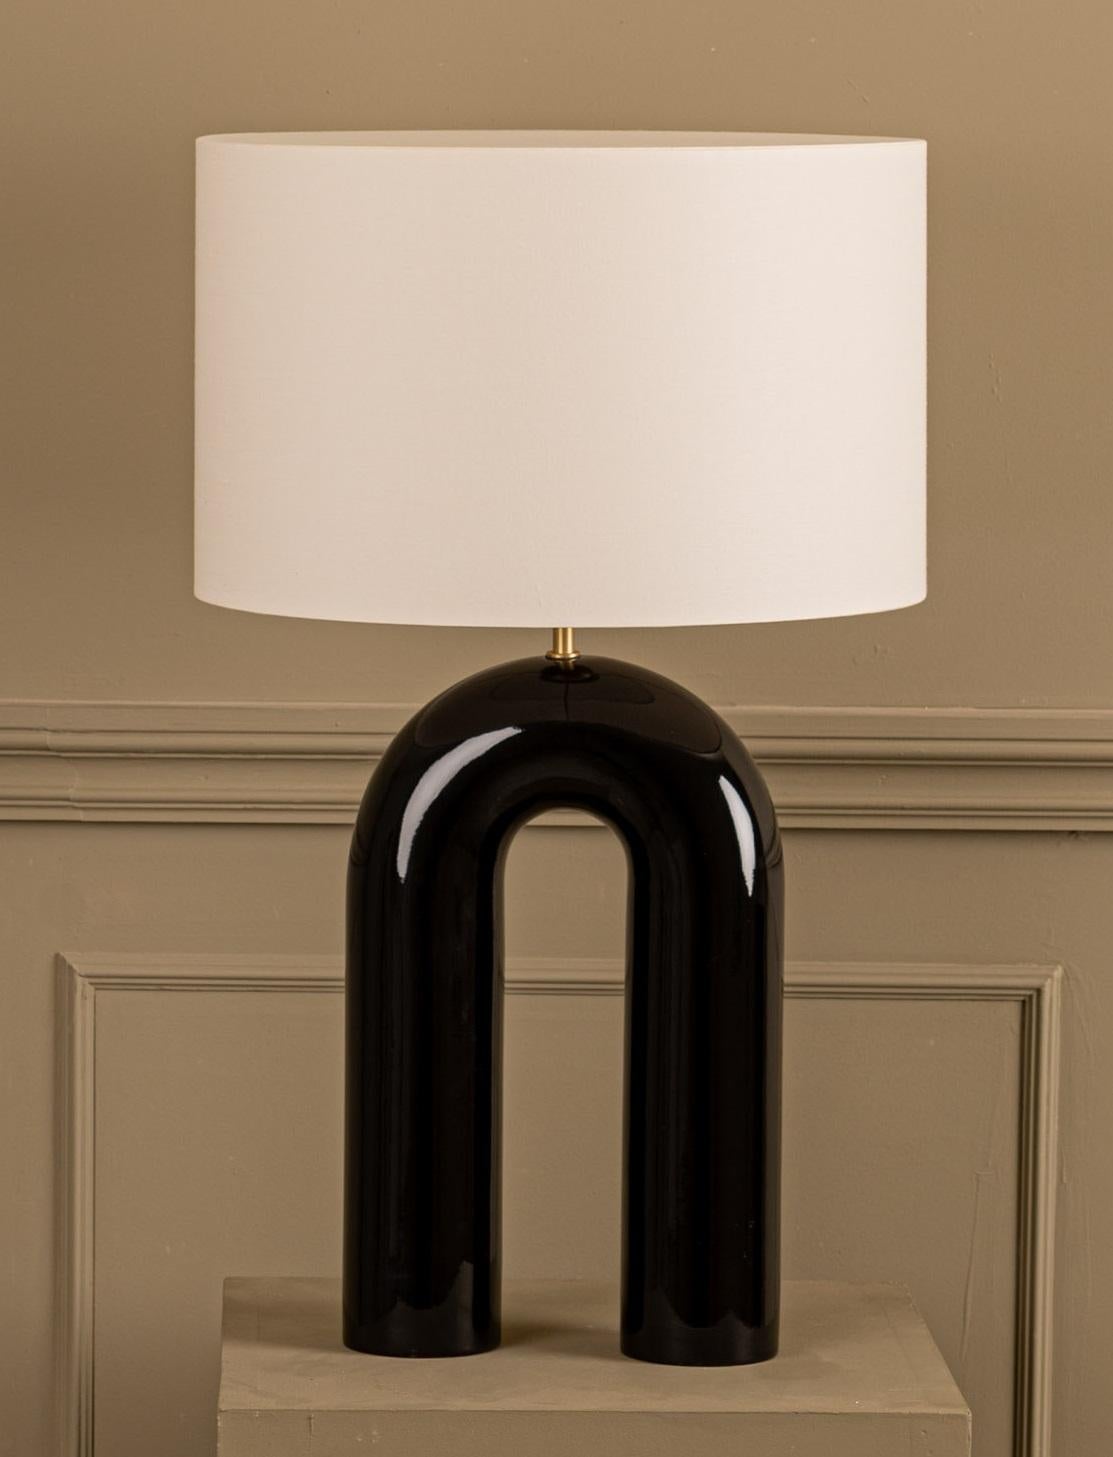 Black Ceramic Arko Table Lamp by Simone & Marcel
Dimensions: Ø 40 x H 67 cm.
Materials: Cotton lampshade and black ceramic.

Also available in different marbles and ceramics. Custom options available on request. Please contact us. 

All our lamps